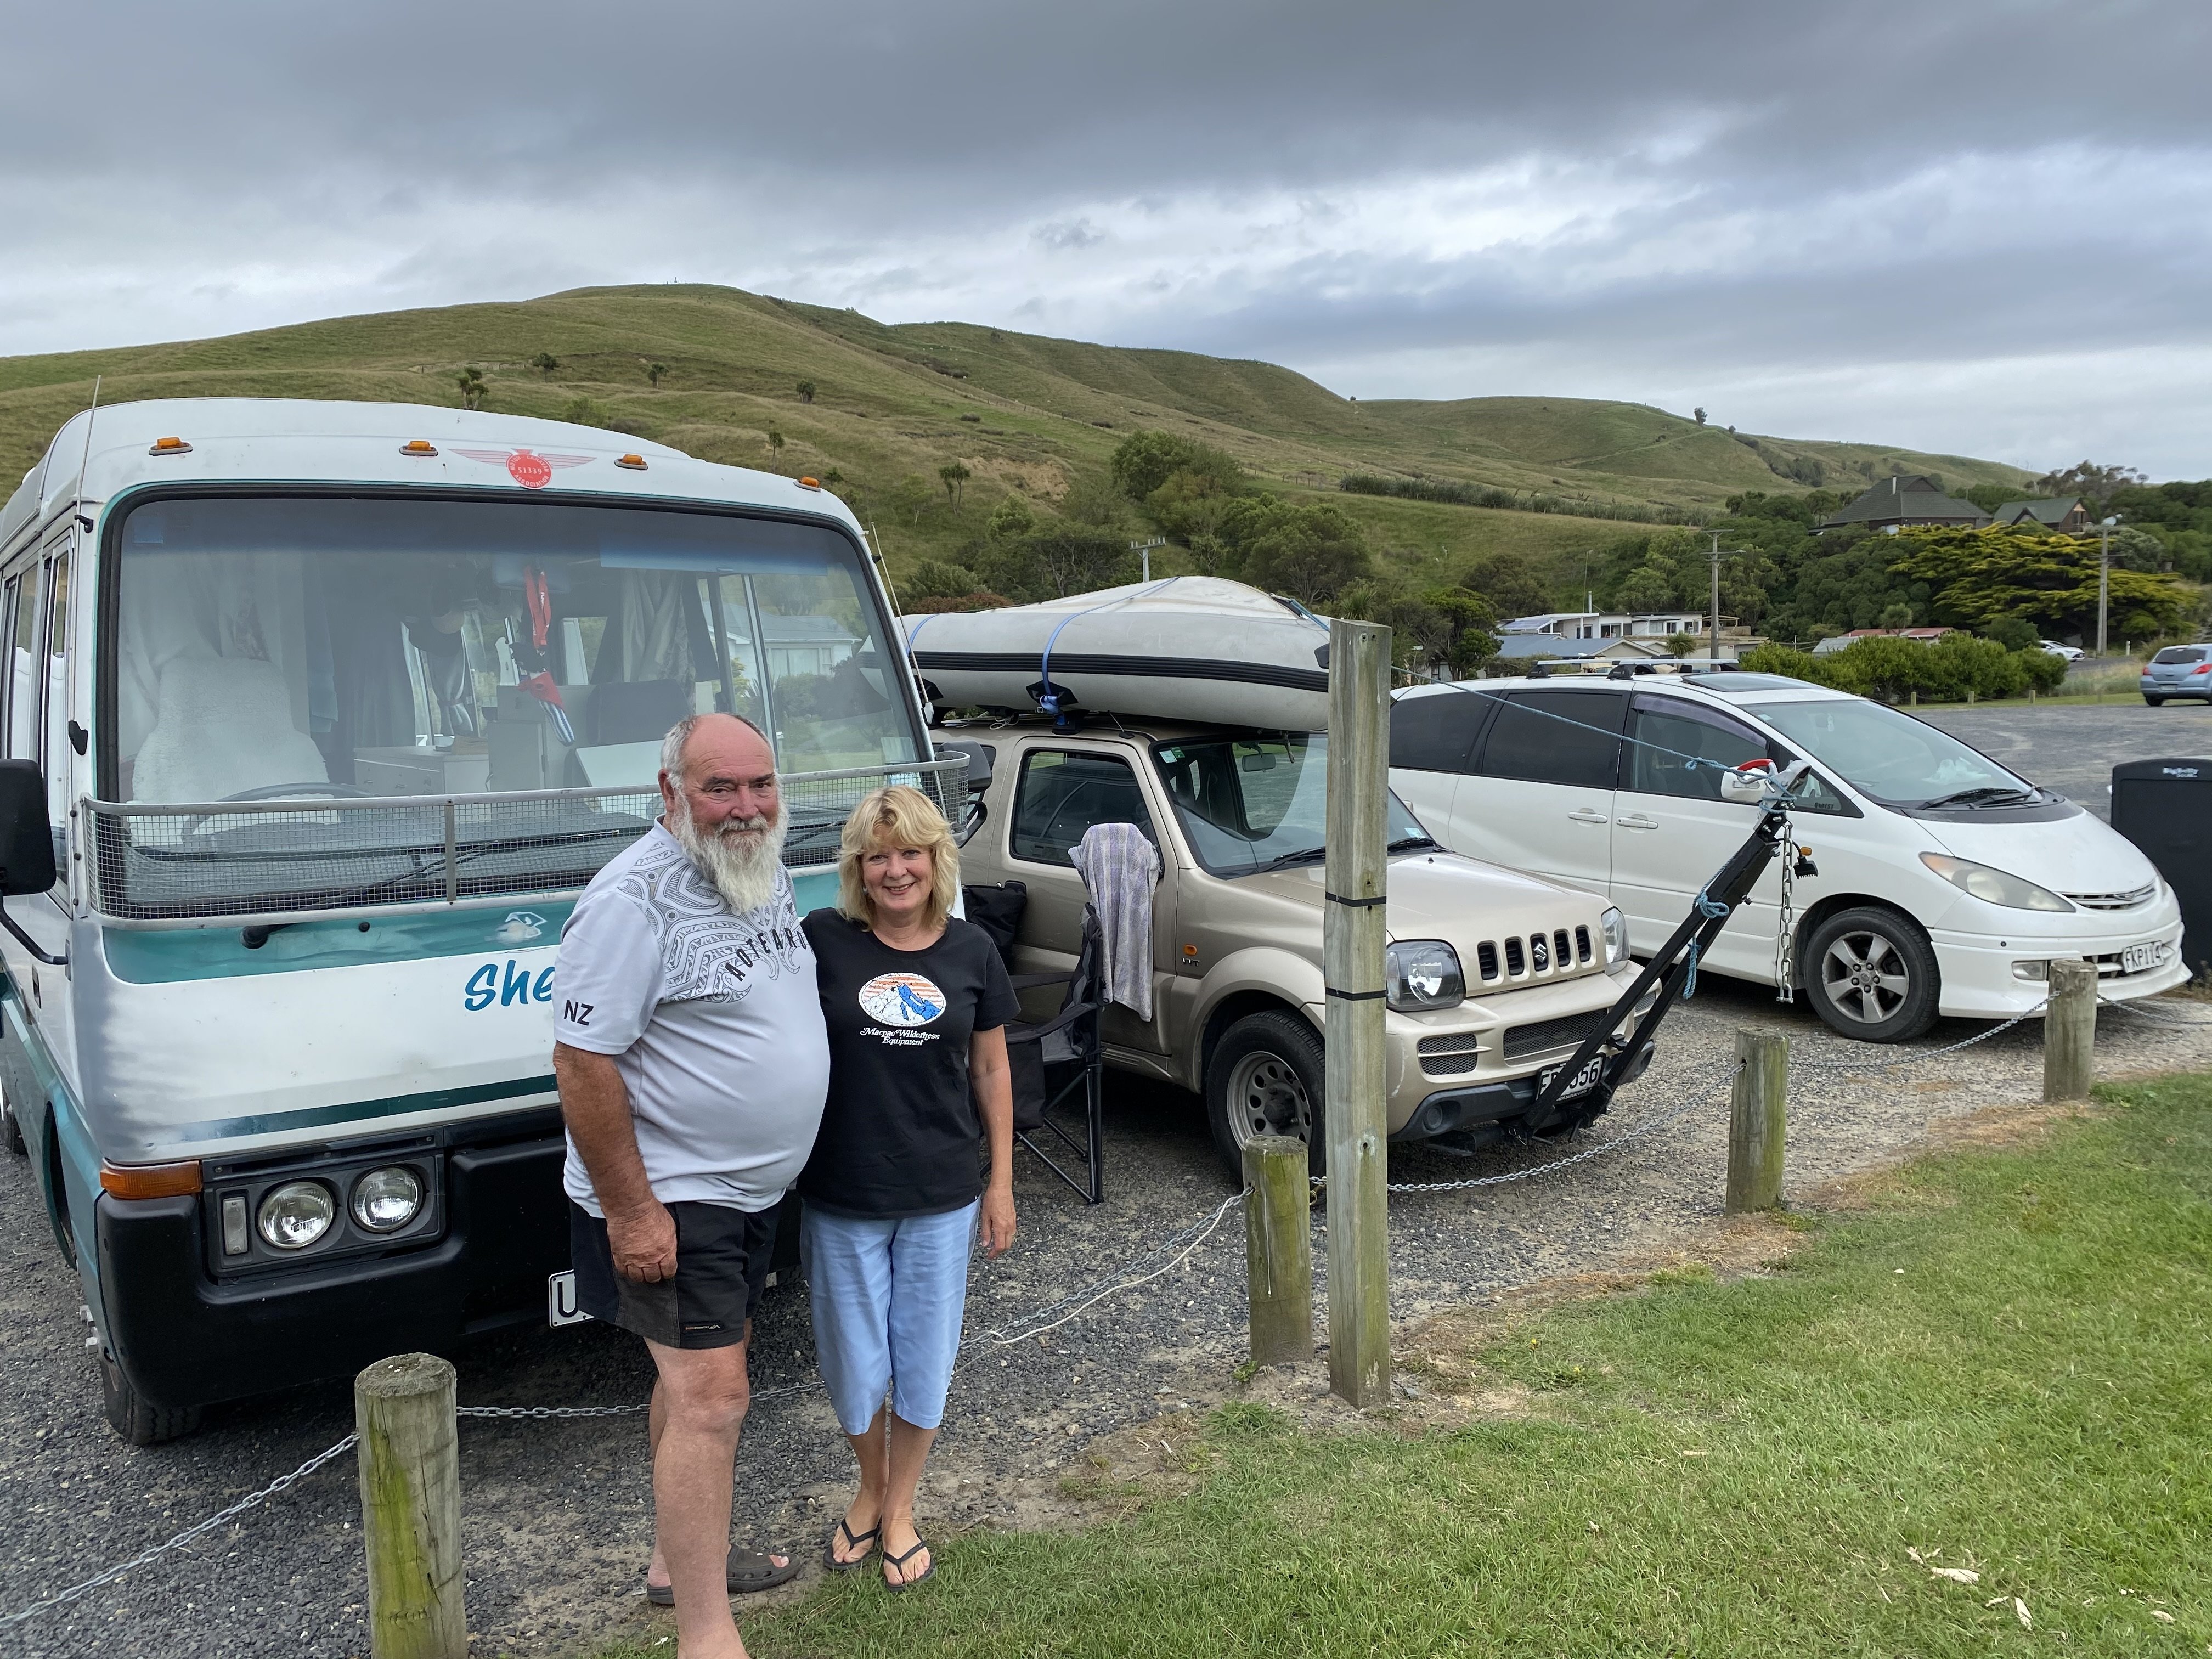 Loving the surroundings at the Ocean View freedom camping site are Allan and Cathy Luchford, of...